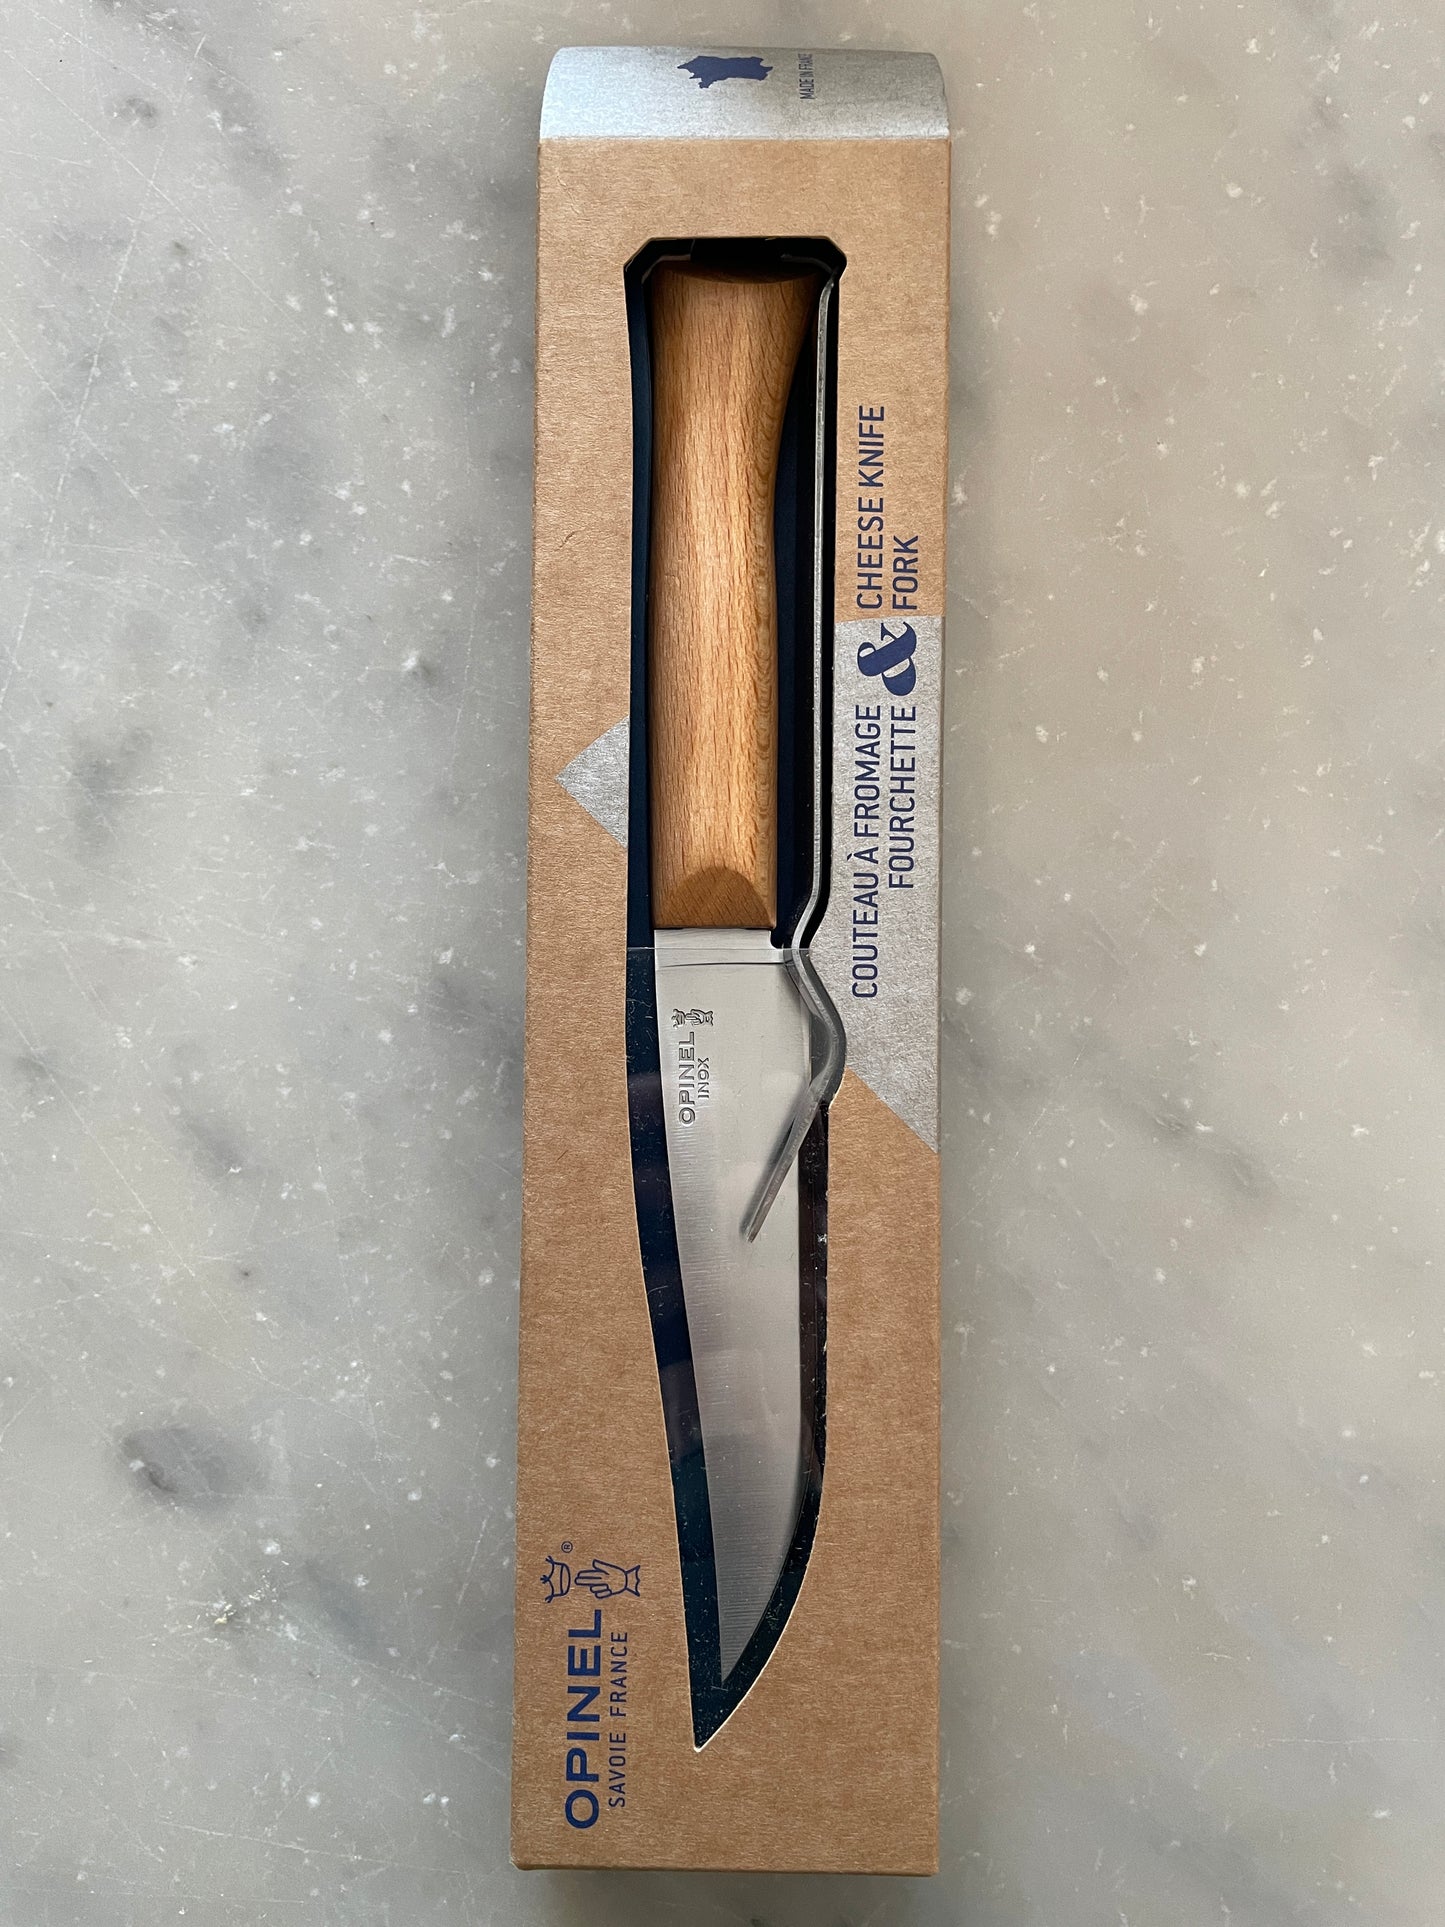 Opinel Cheese Knife & Fork Set